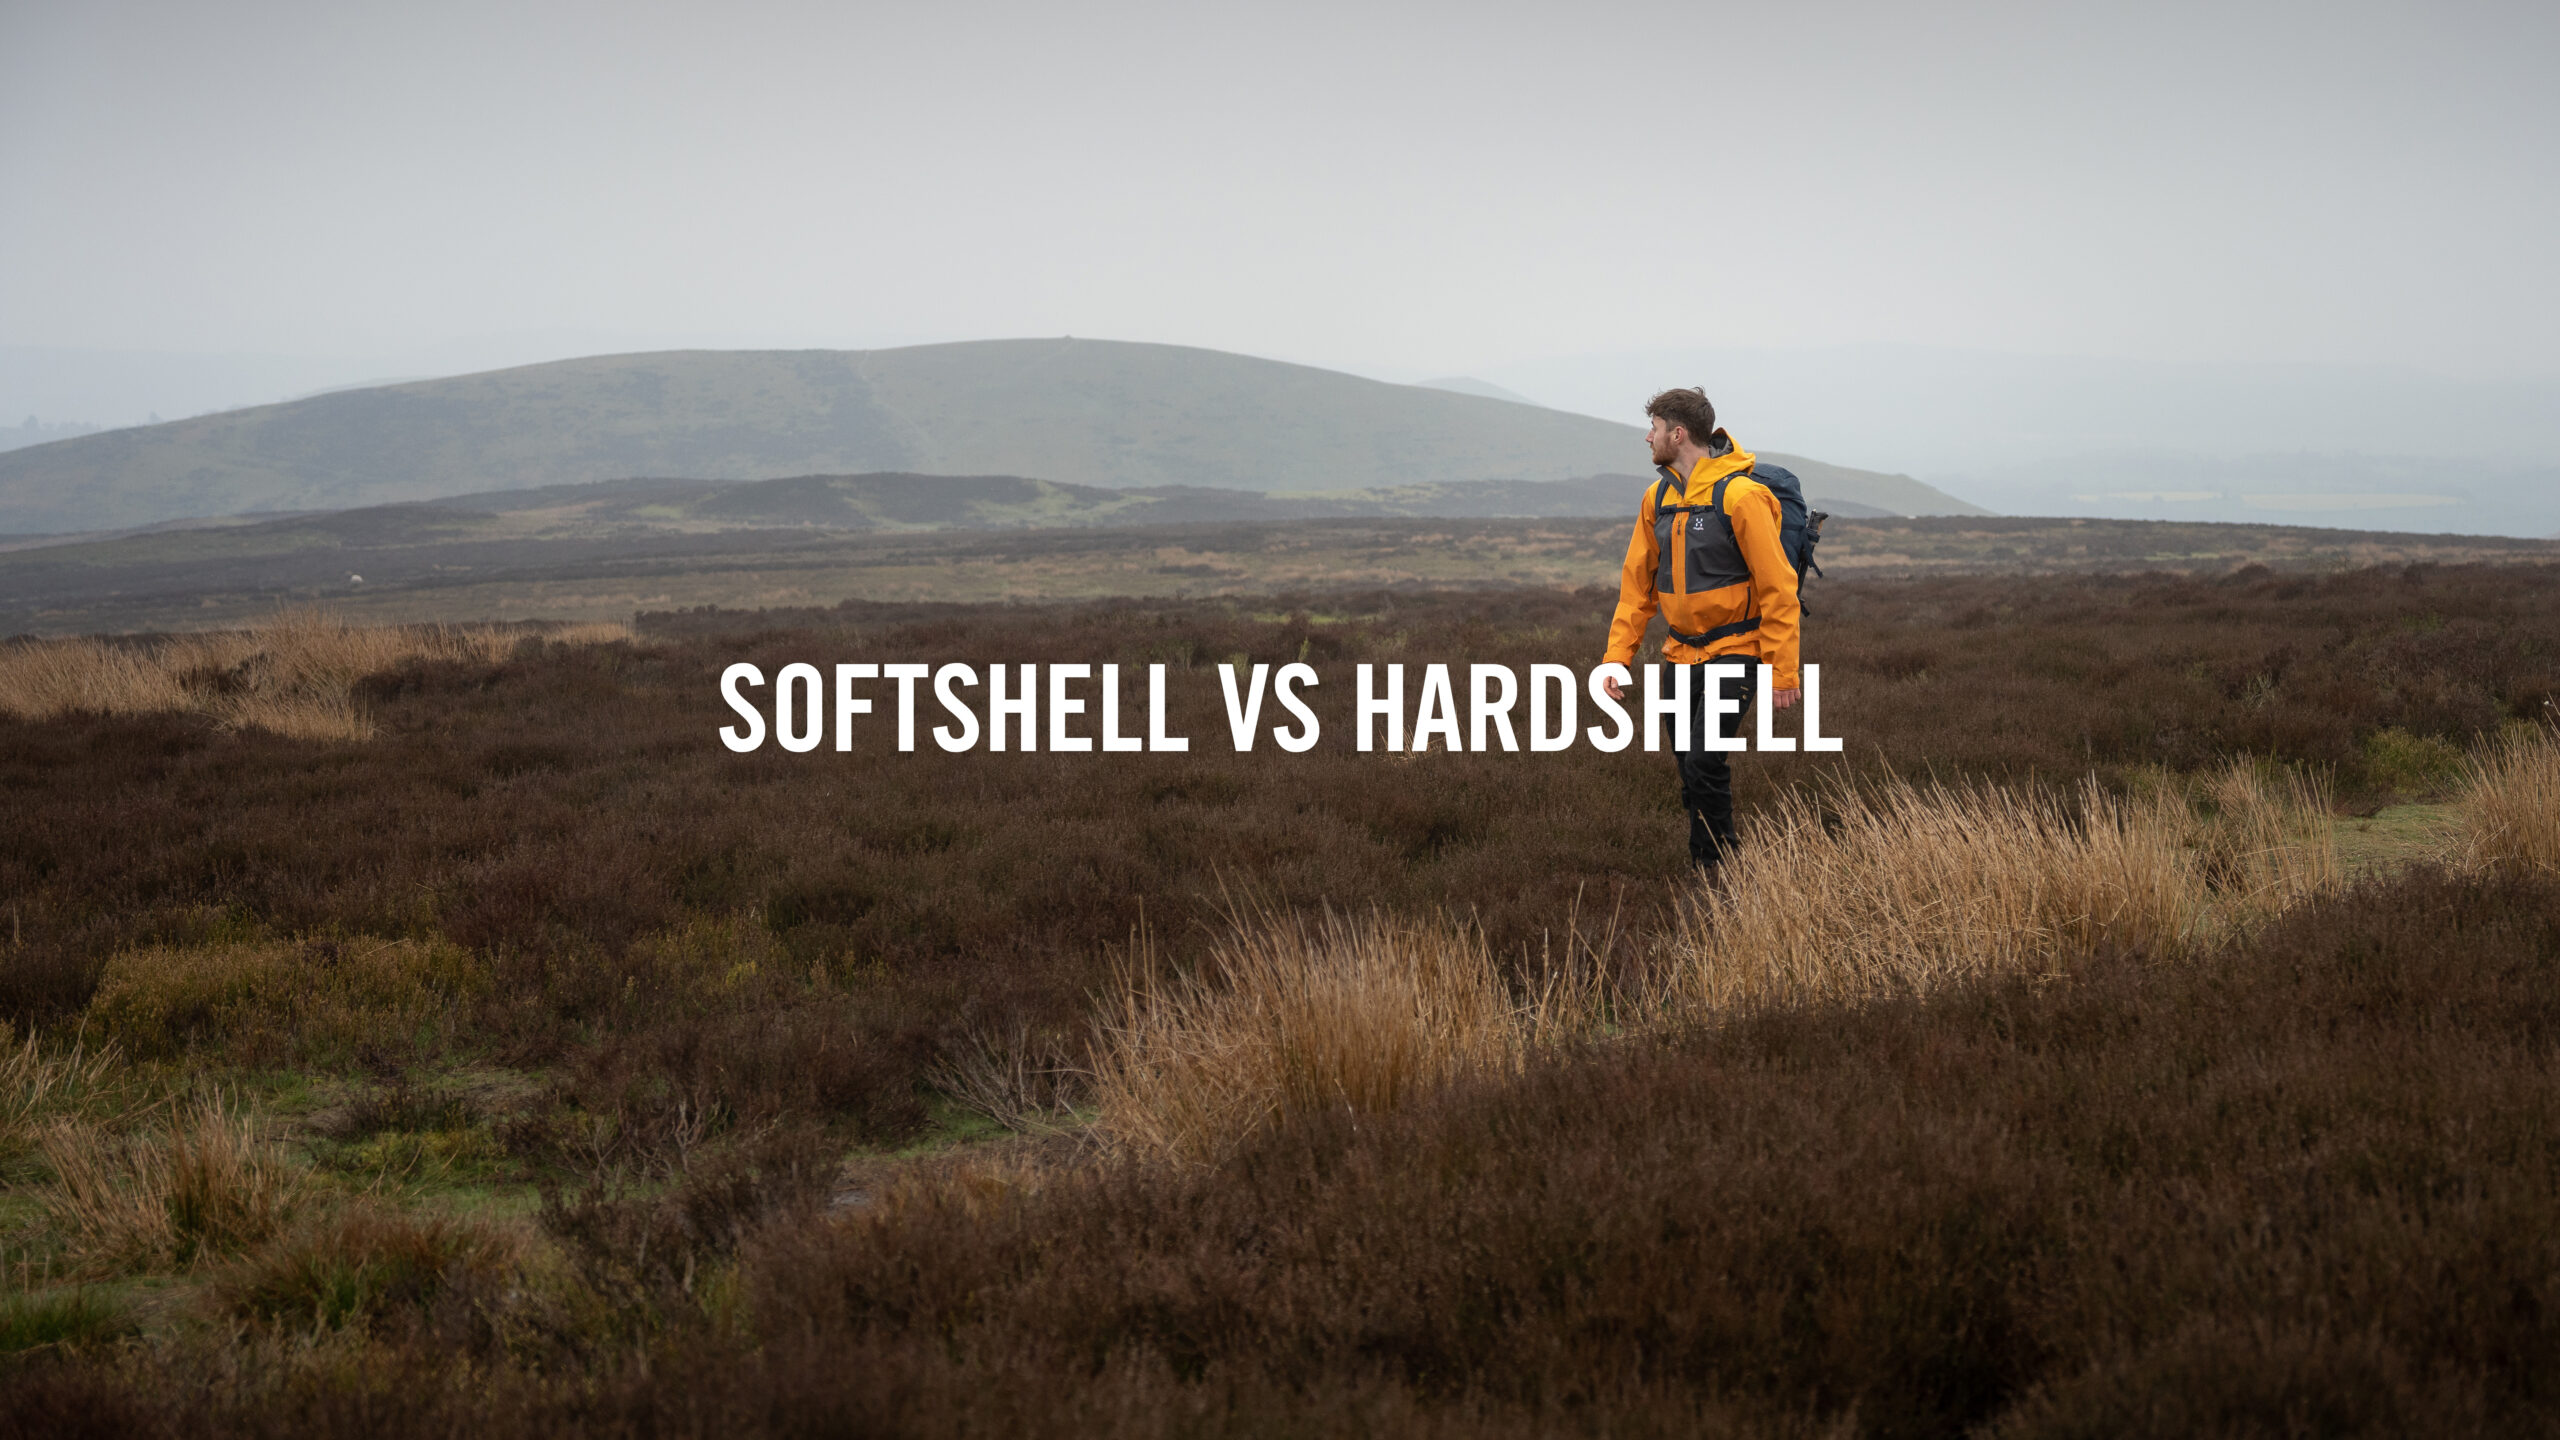 Softshell vs Hardshell, Which is Best?